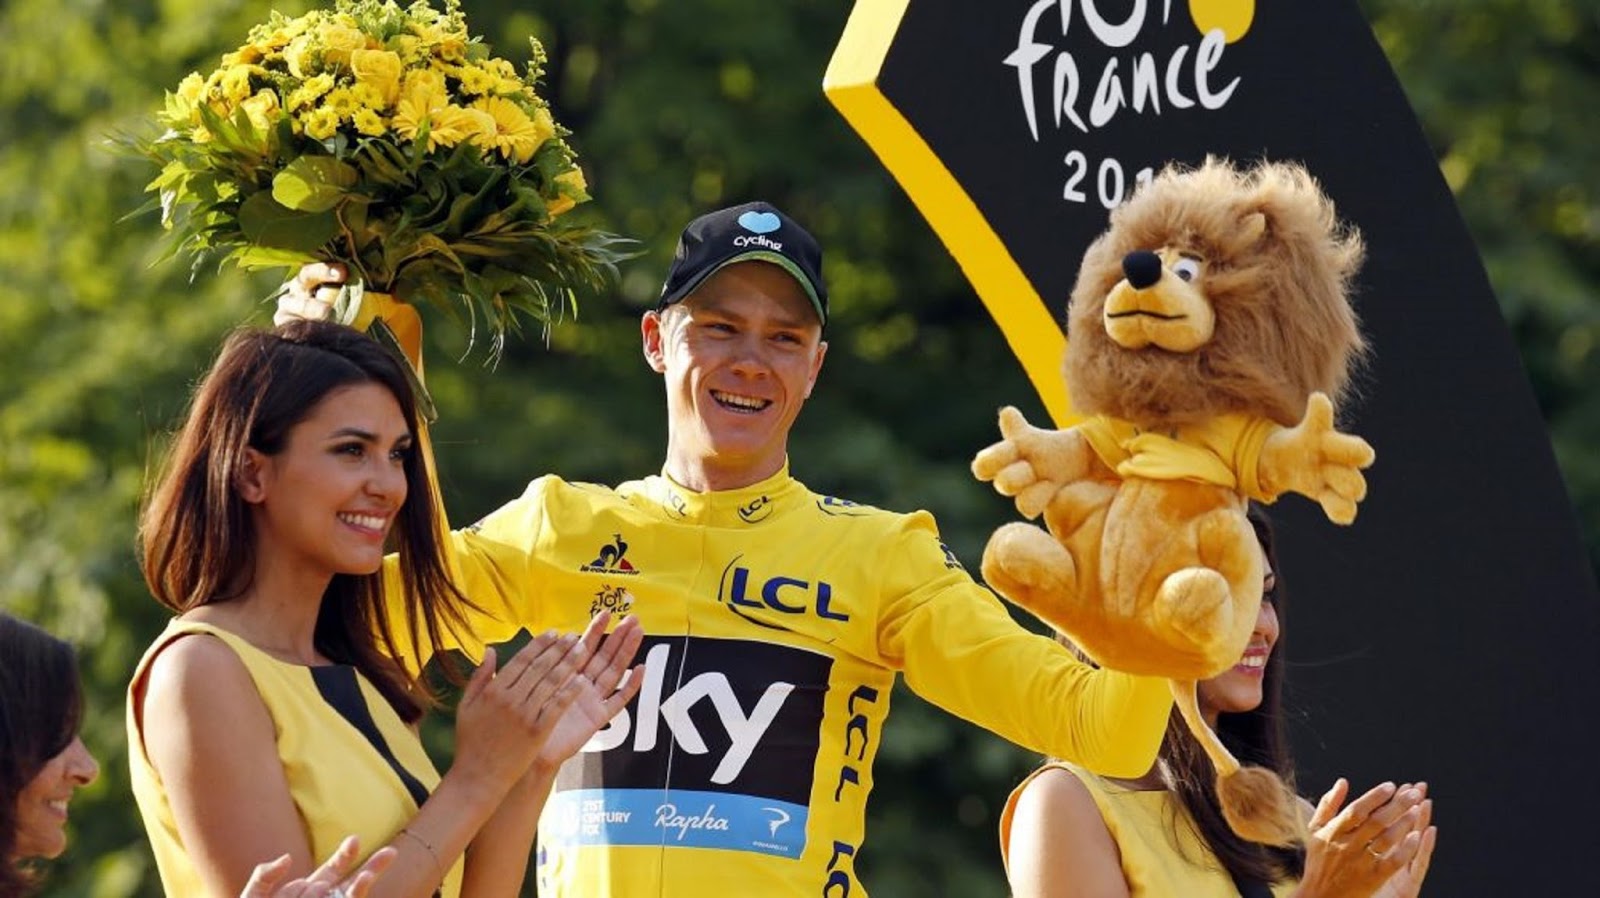 CHRIS FROOME 4